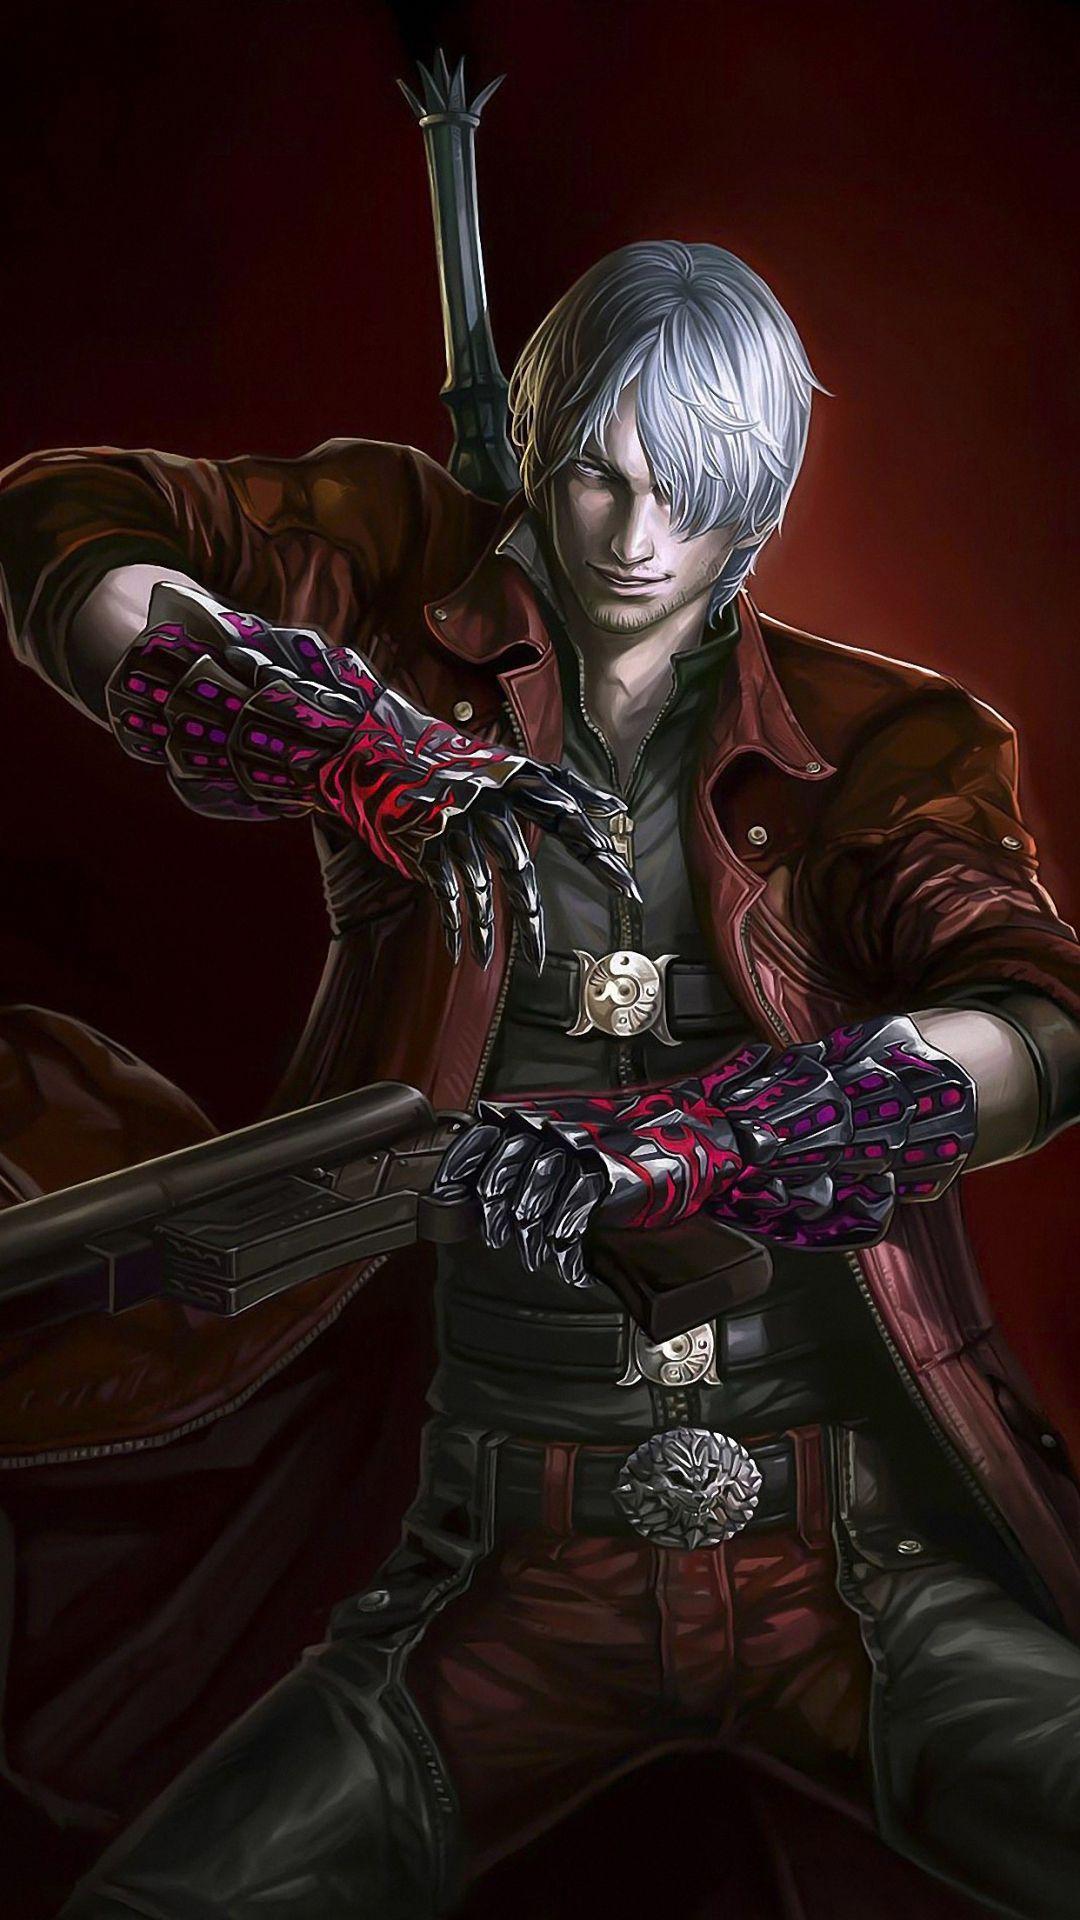 Devil May Cry Iphone Wallpapers Top Free Devil May Cry Iphone Backgrounds Wallpaperaccess